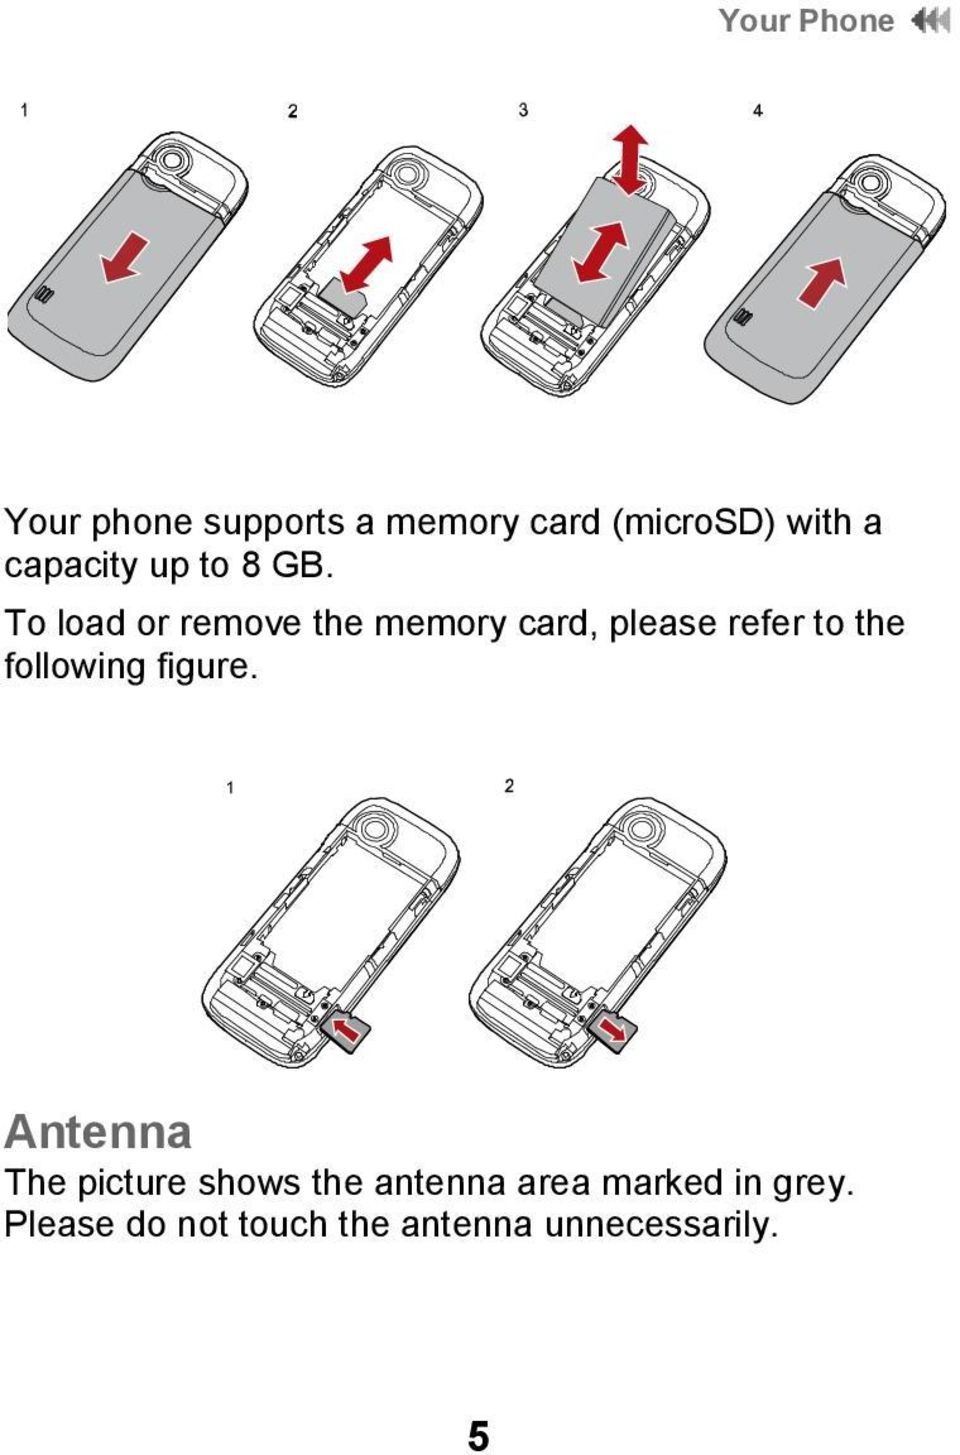 To load or remove the memory card, please refer to the following